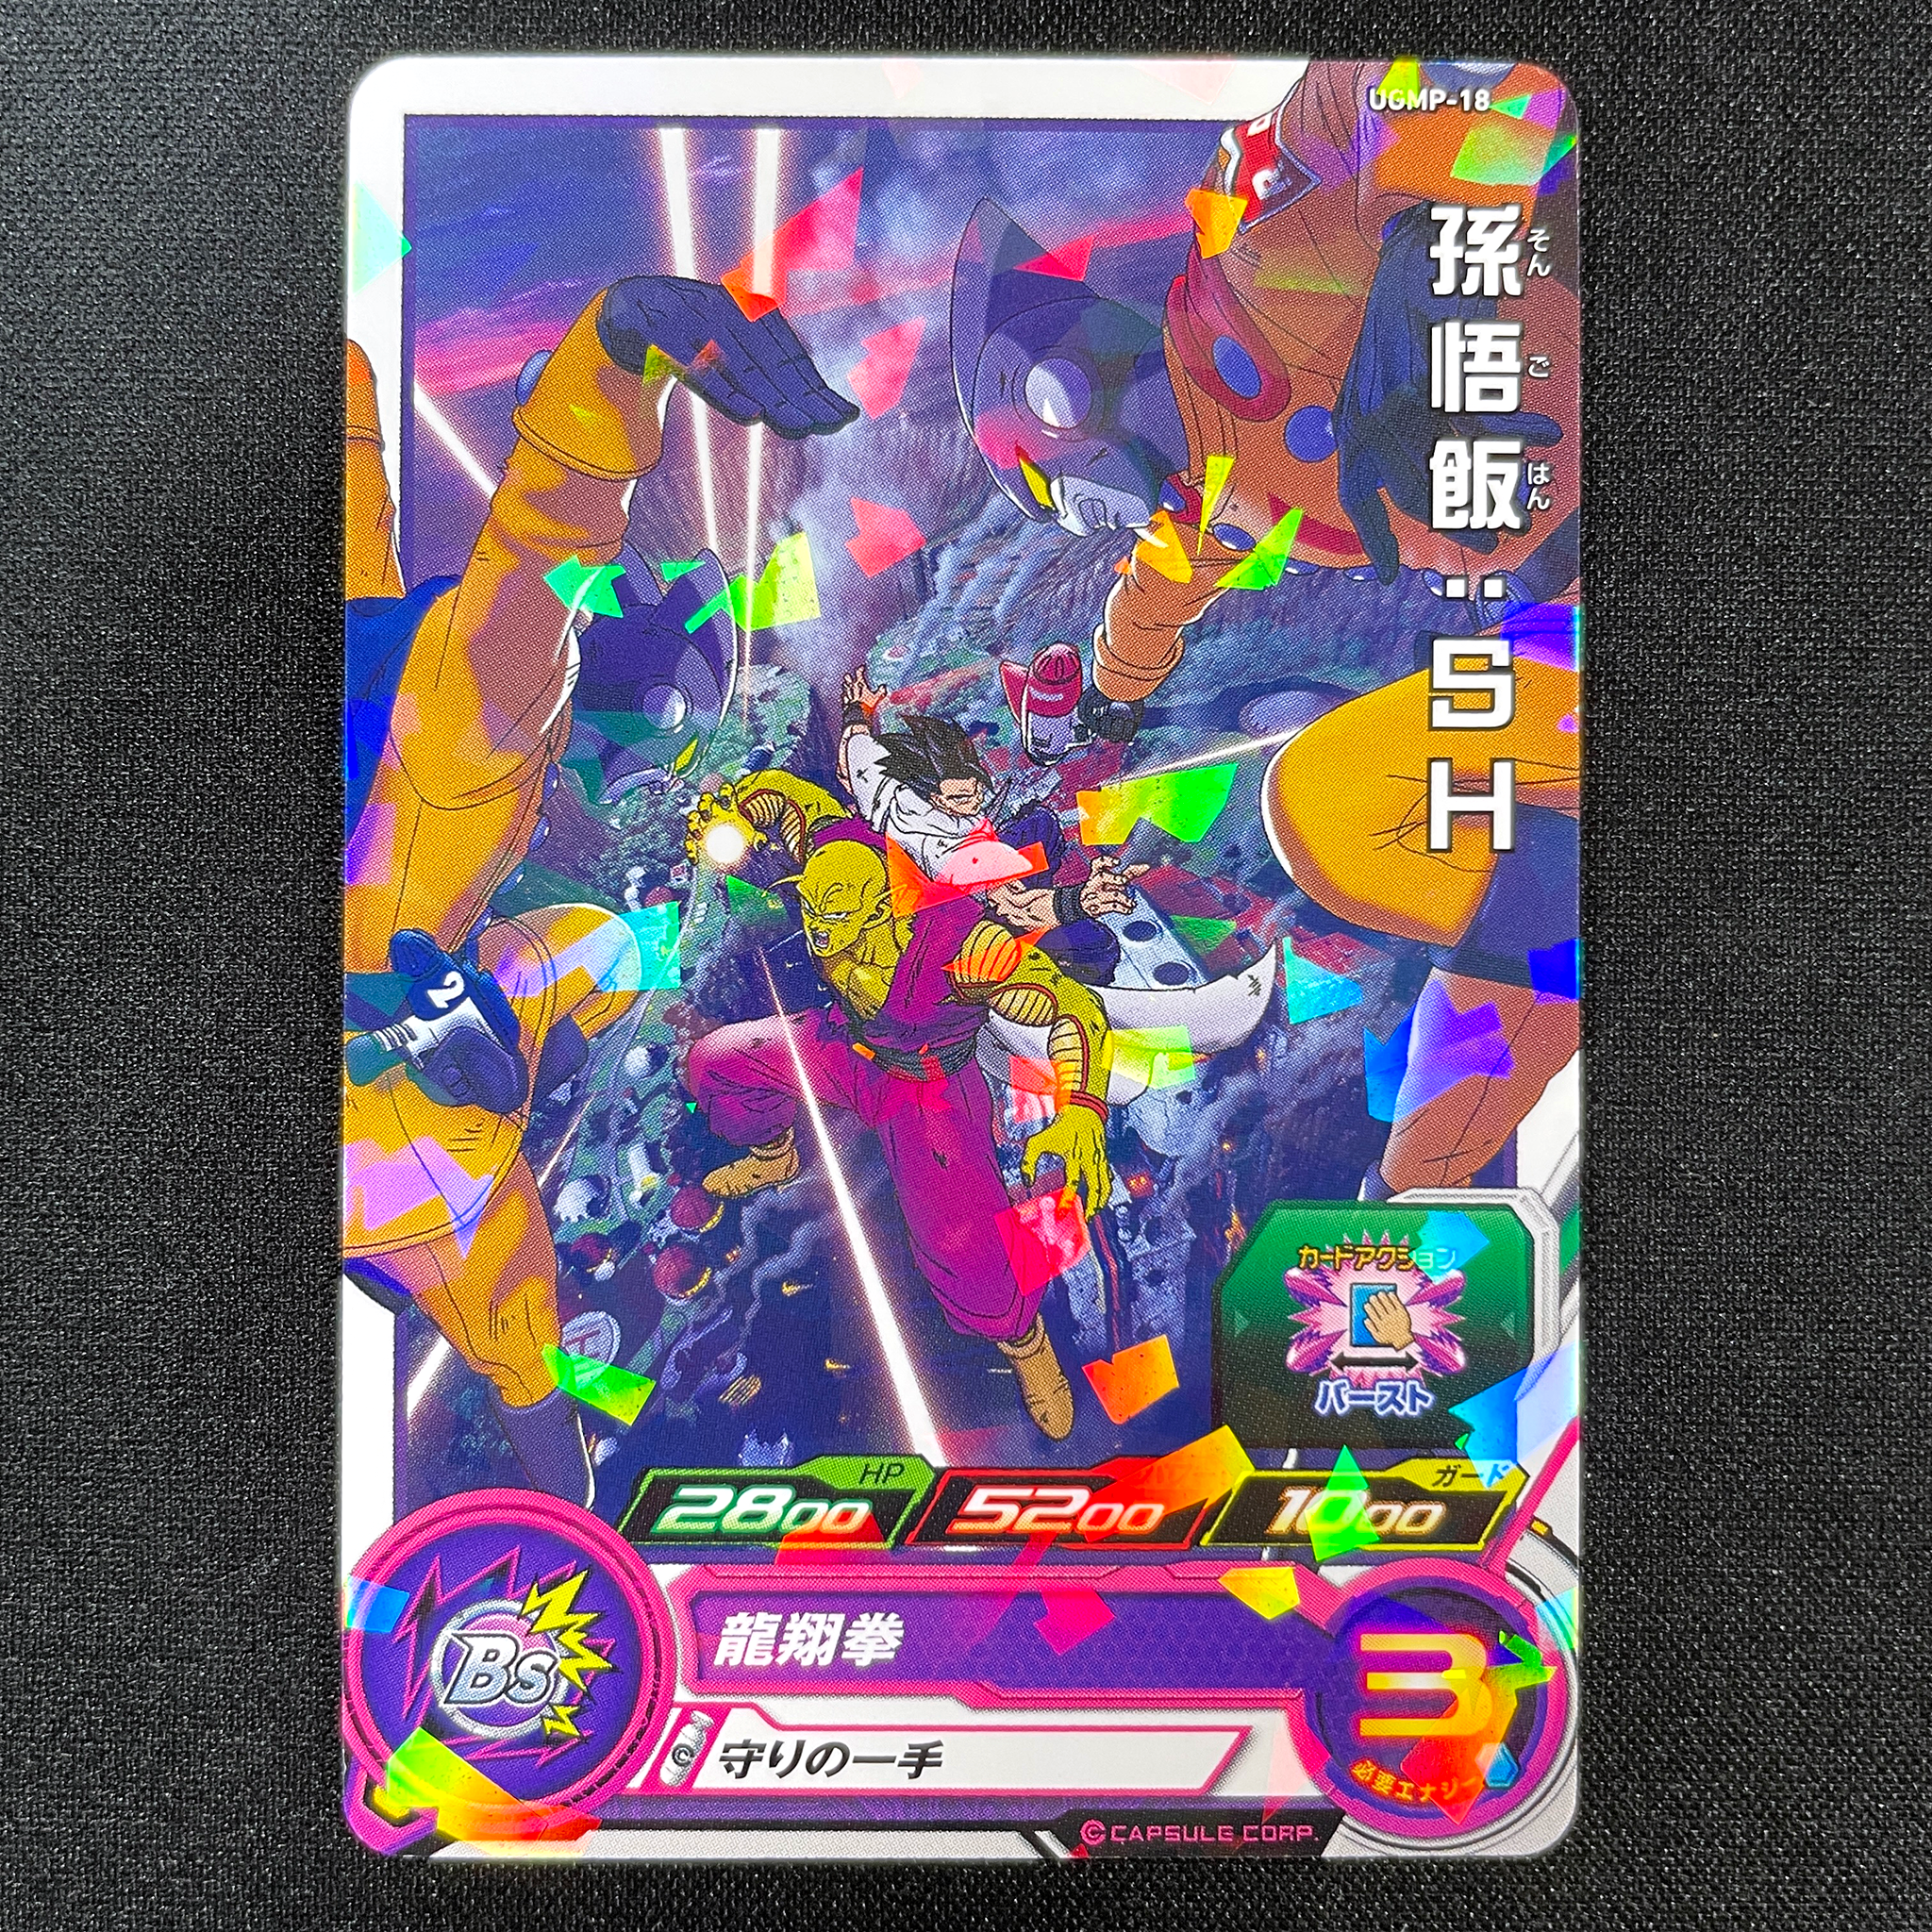 SUPER DRAGON BALL HEROES UGMP-18  Promotional card distributed in the partner game center on May 14th and 15th, 2022, subject to availability.  Son Gohan : SH